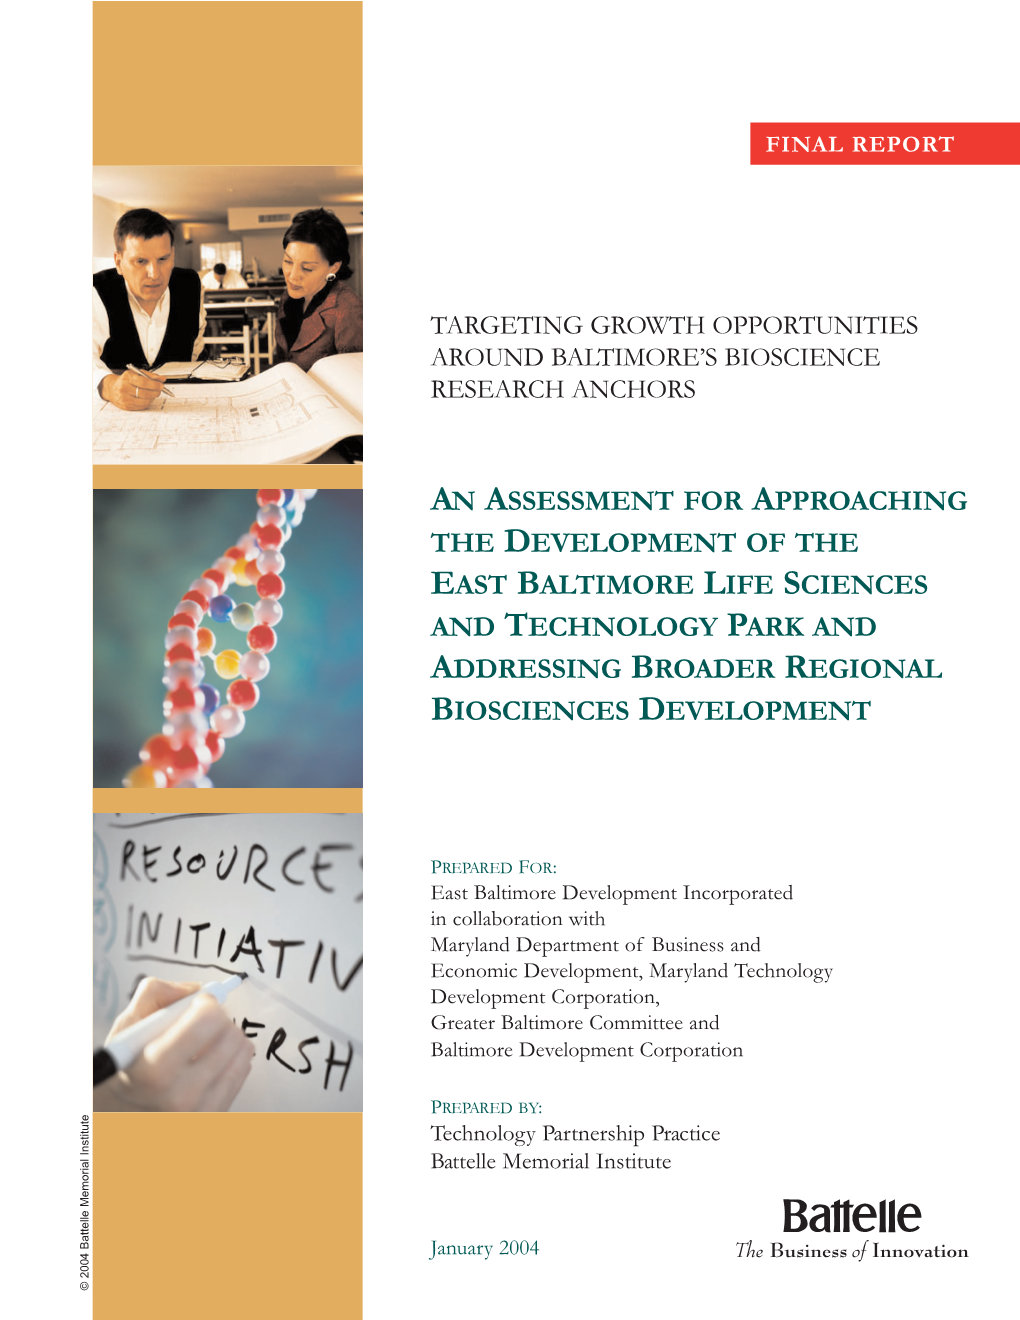 An Assessment for Approaching the Development of the East Baltimore Life Sciences and Technology Park and Addressing Broader Regional Biosciences Development